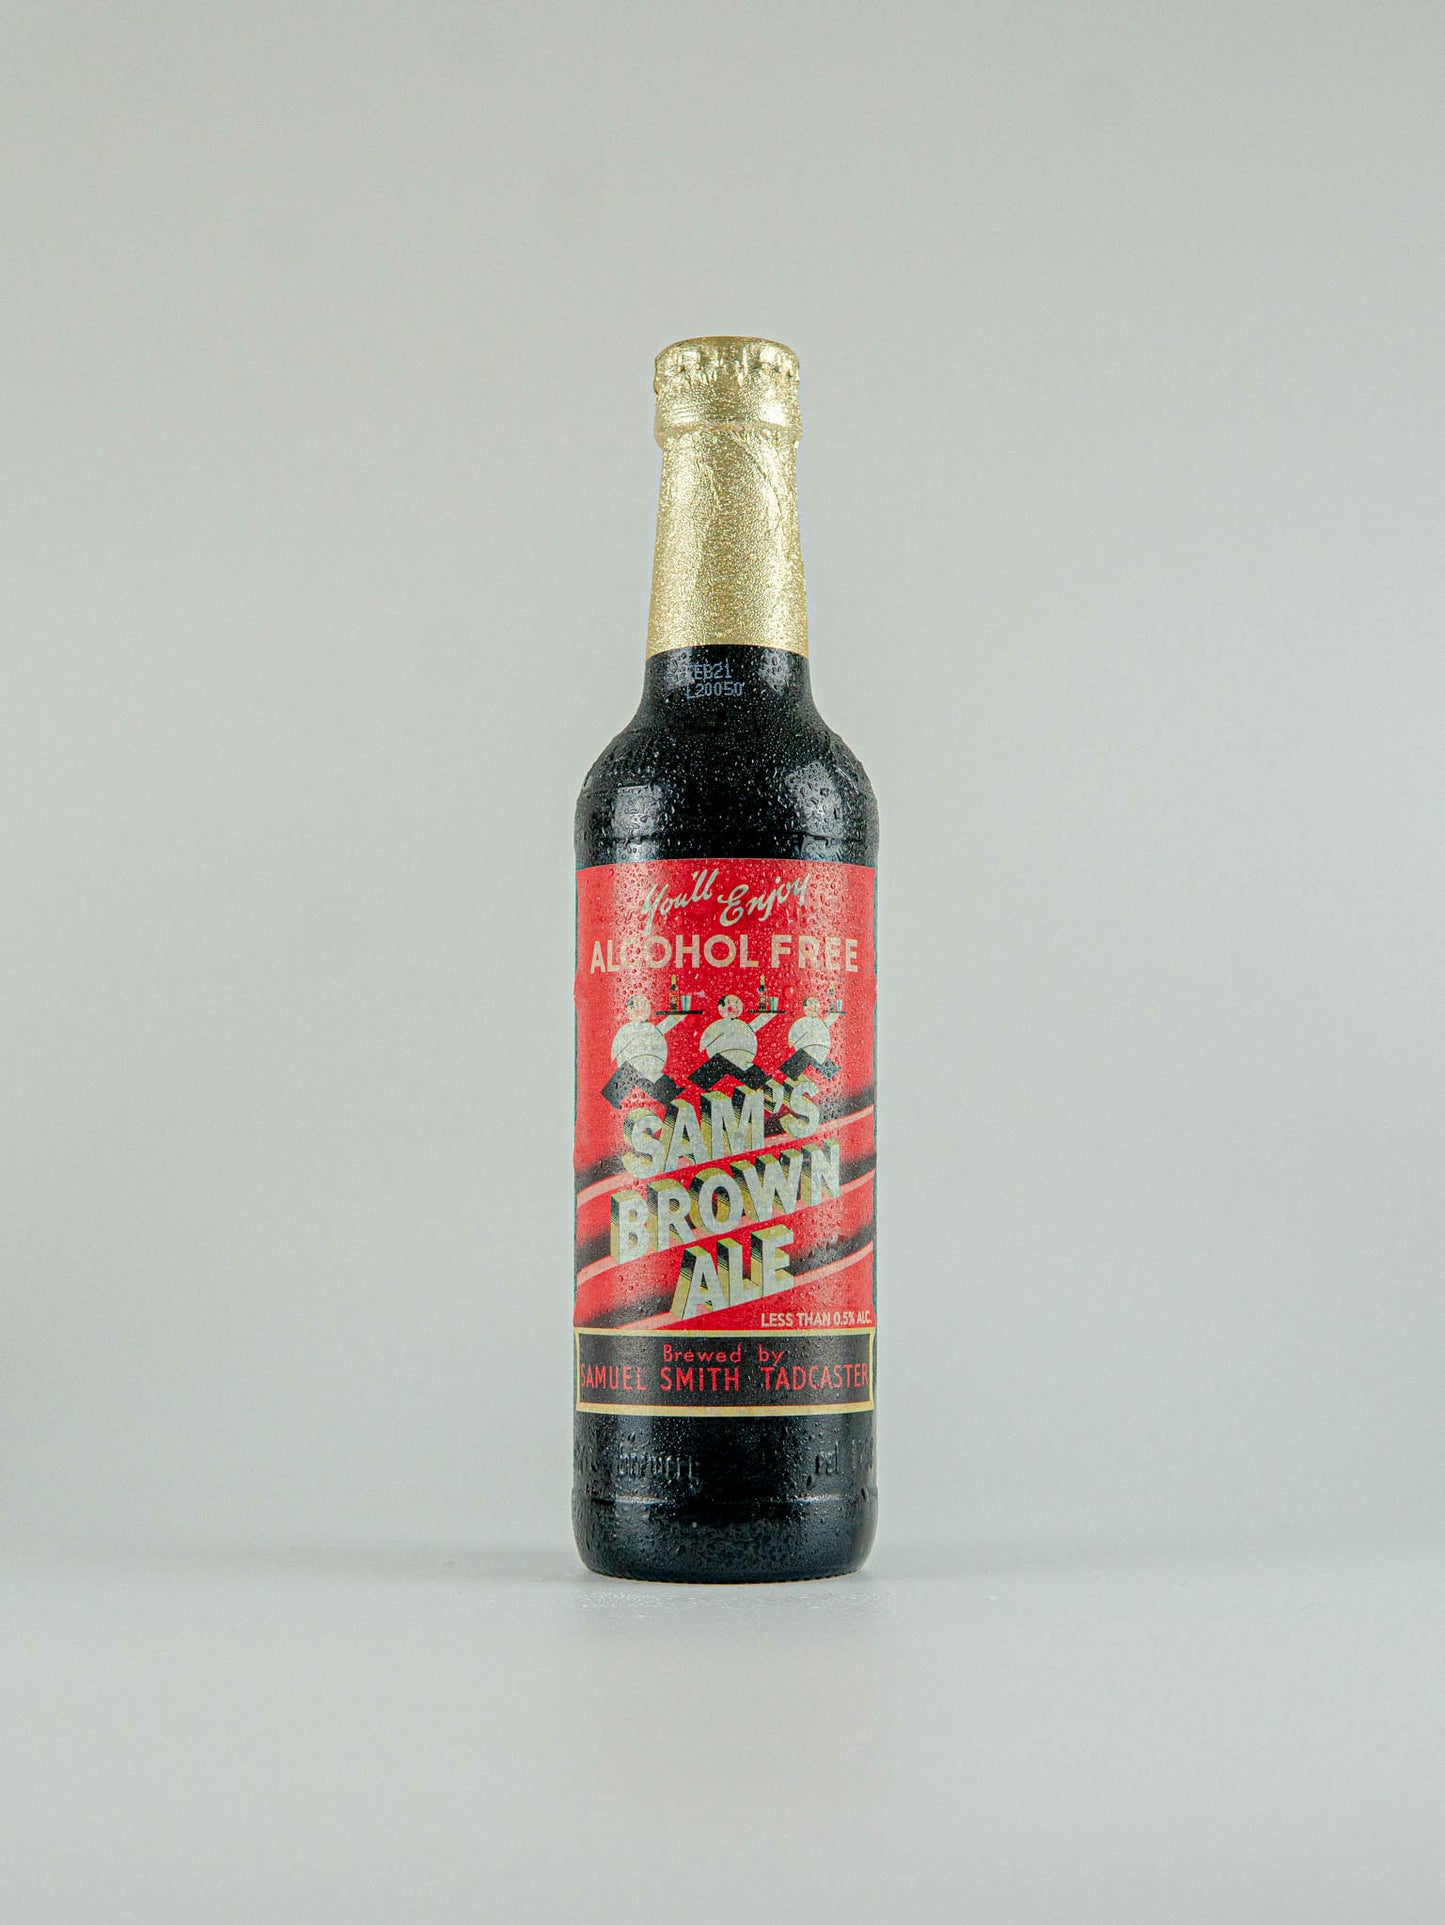 Samuel Smith's Brewery Sam's Brown Ale Alcohol Free 0.5% - 355ml